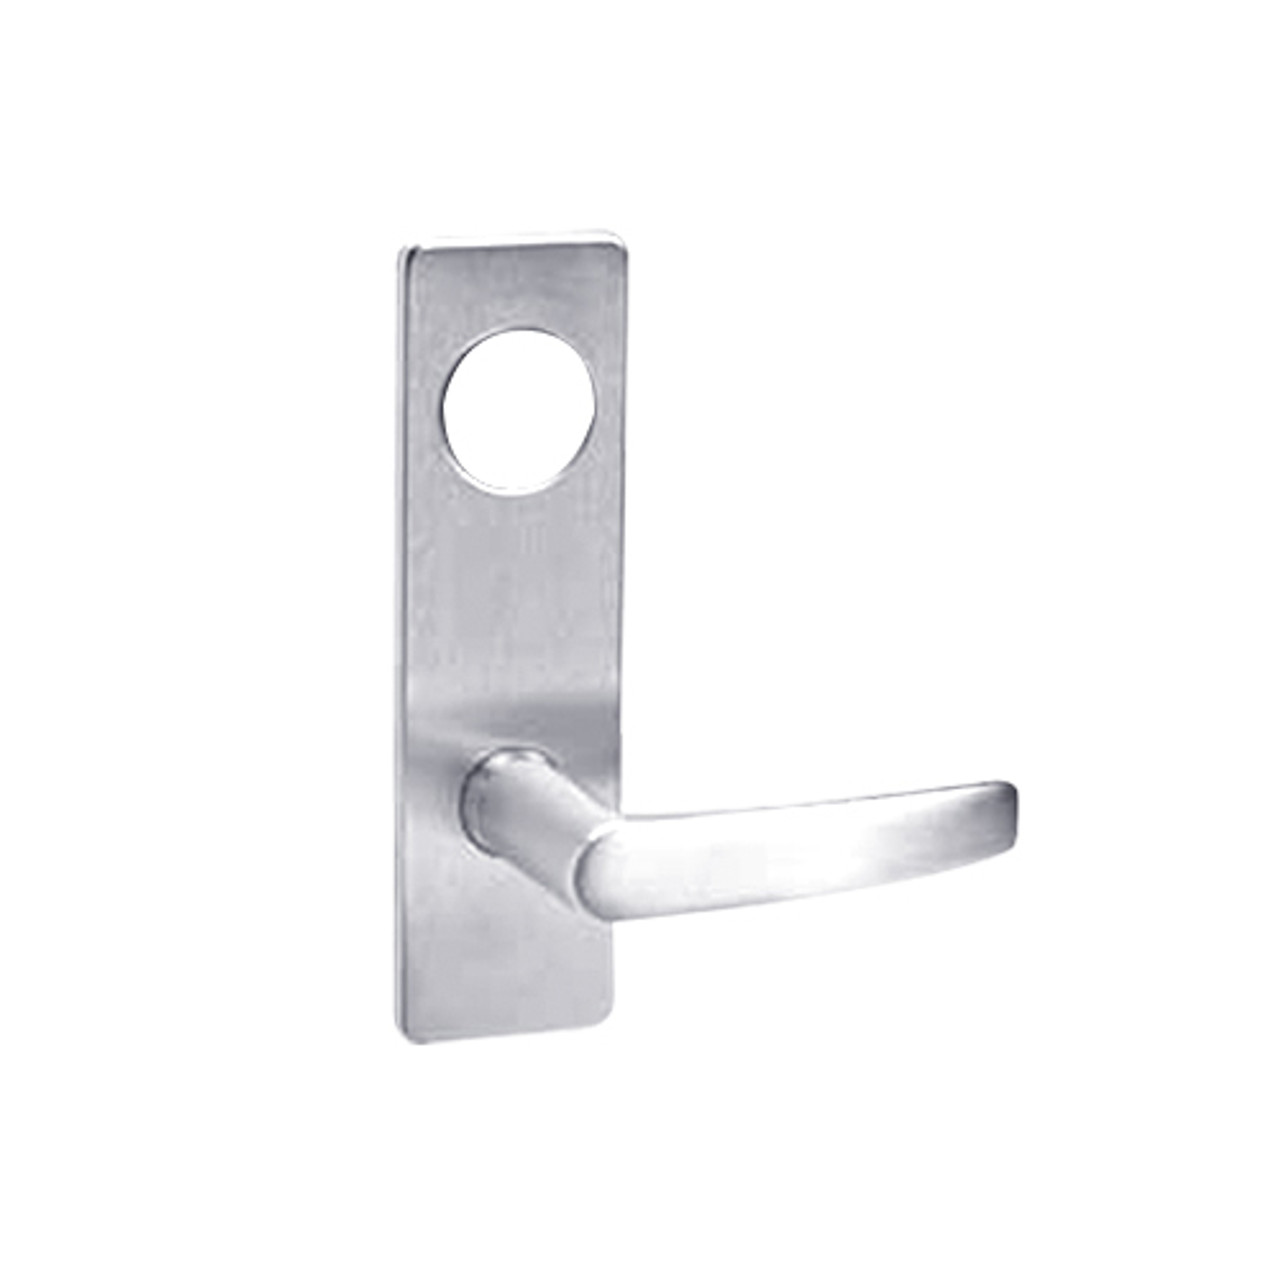 ML2022-ASN-625 Corbin Russwin ML2000 Series Mortise Store Door Locksets with Armstrong Lever with Deadbolt in Bright Chrome